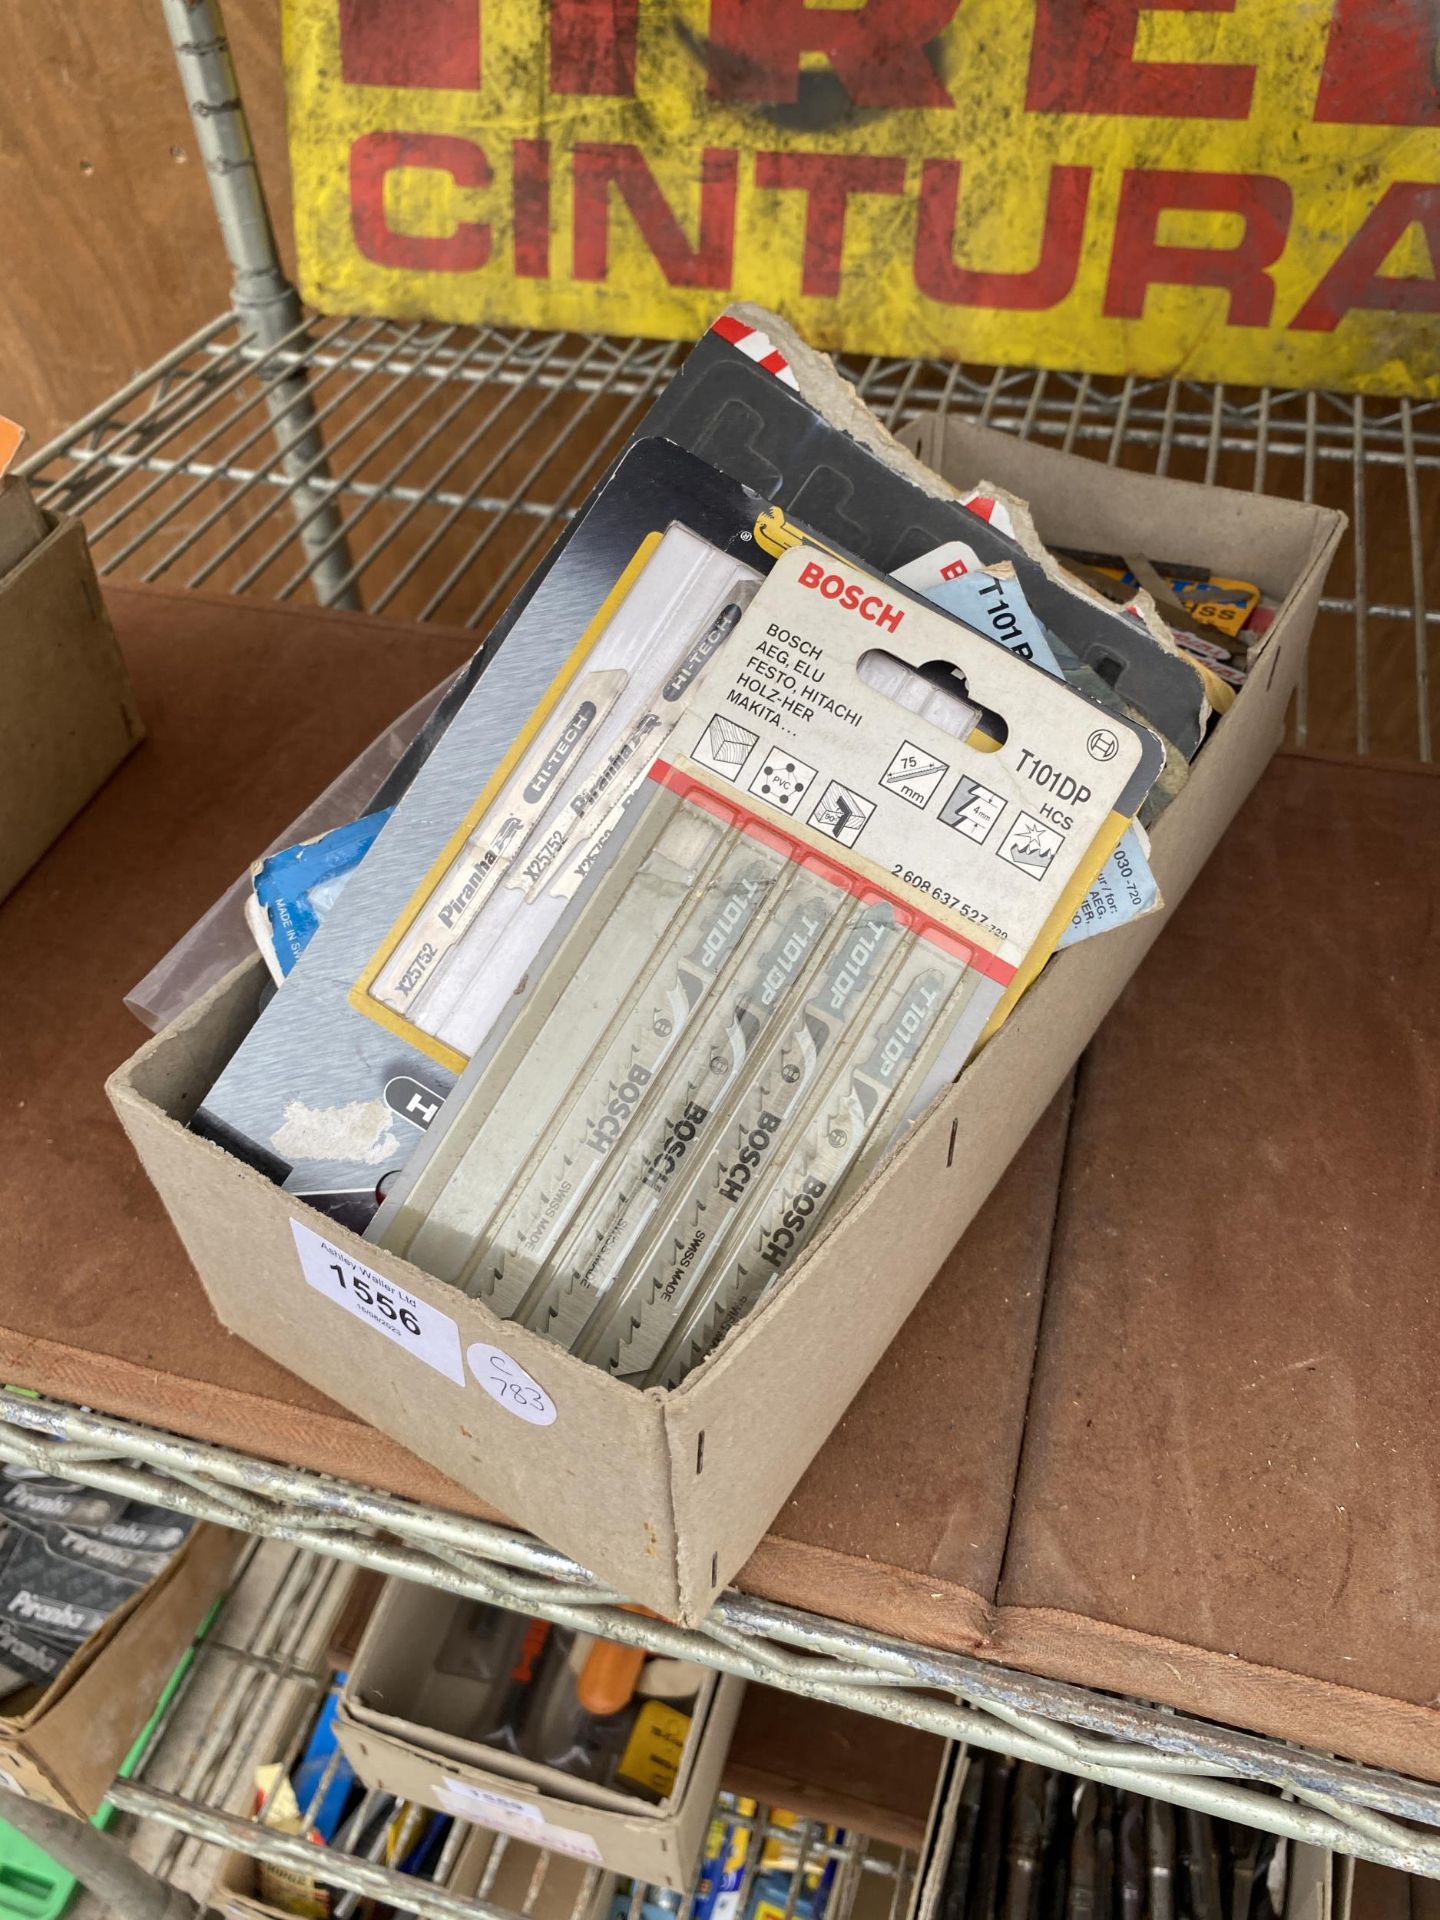 A BOX OF NEW OLD STOCK AND FURTHER TOOL PARTS, BOSCH ETC